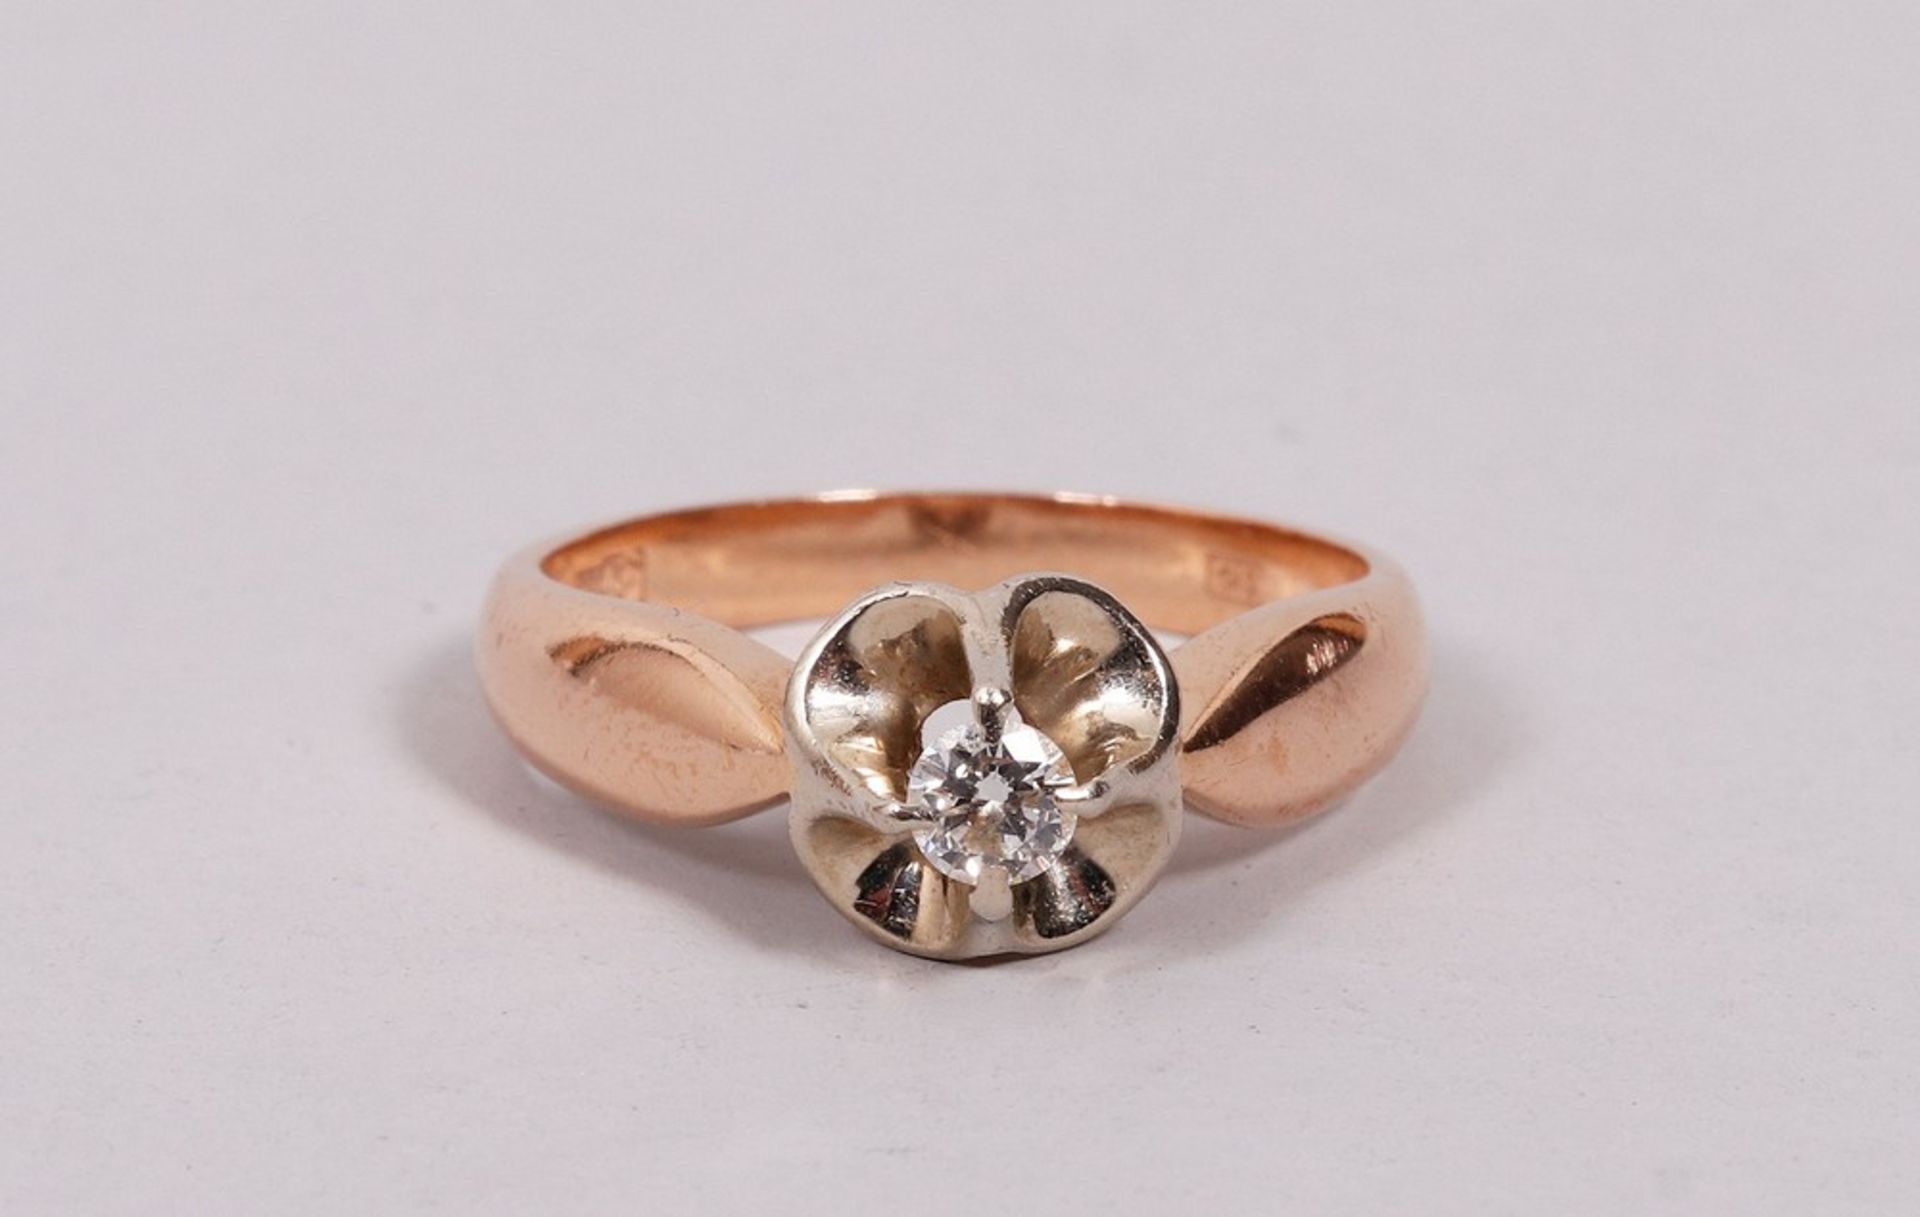 Solitaire ring made of red gold - Image 3 of 4